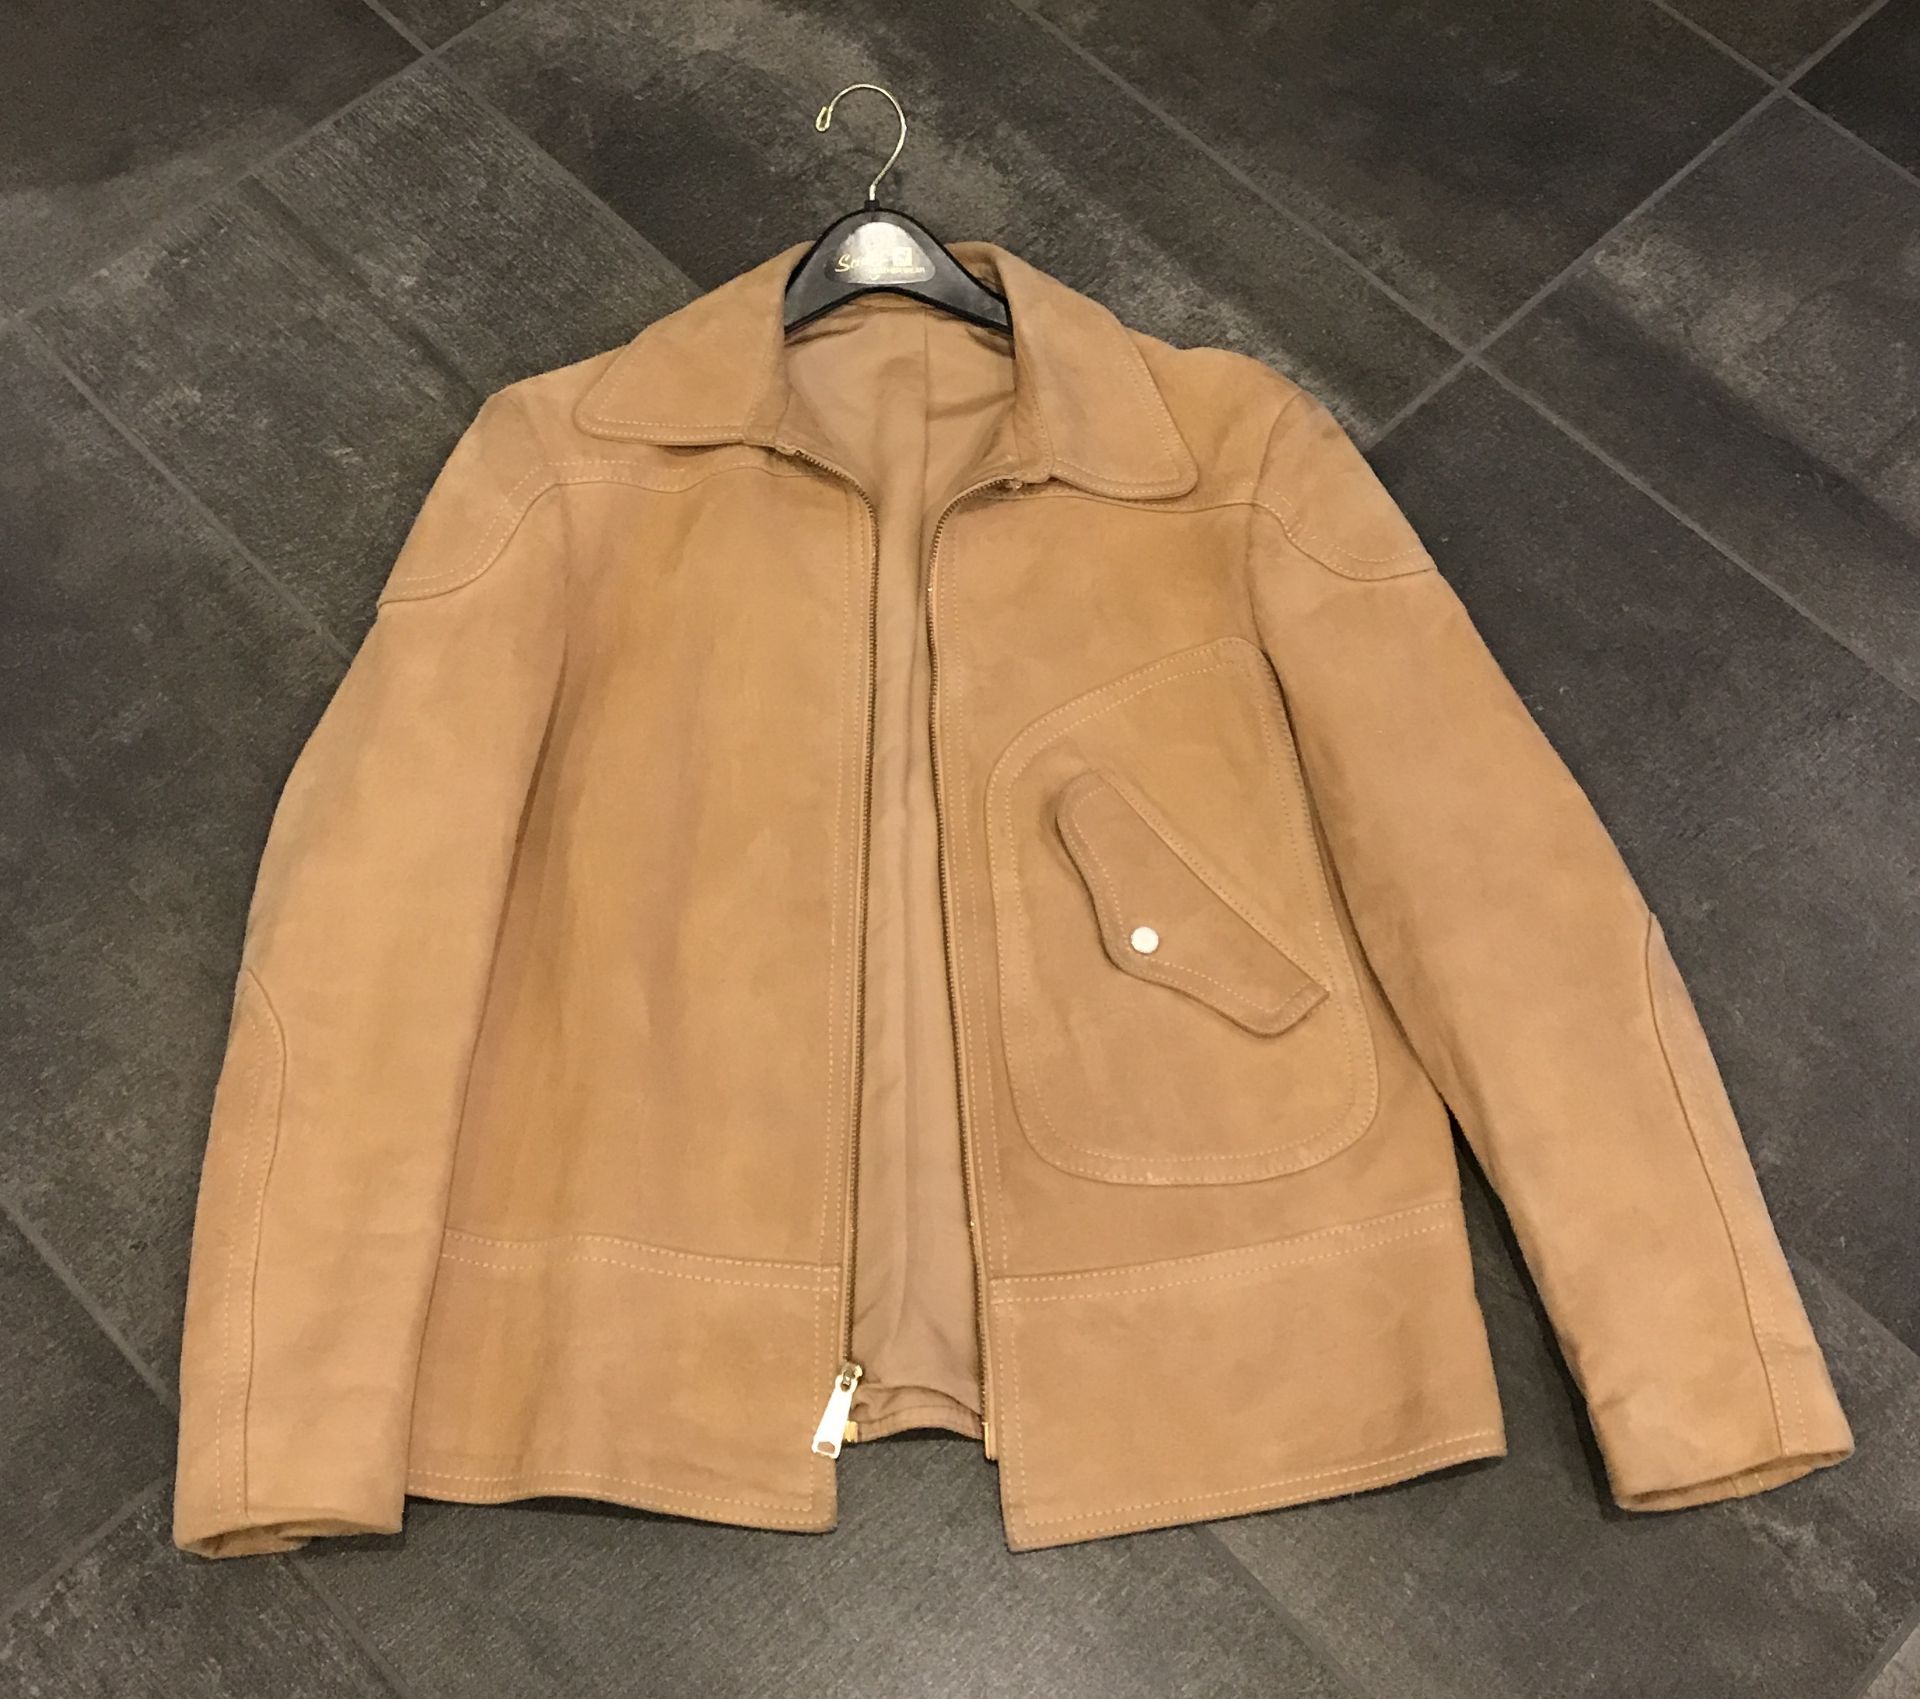 VINTAGE TAN LEATHER JACKET WITH EXTERIOR POCKET (HANGER NOT INCLUDED)